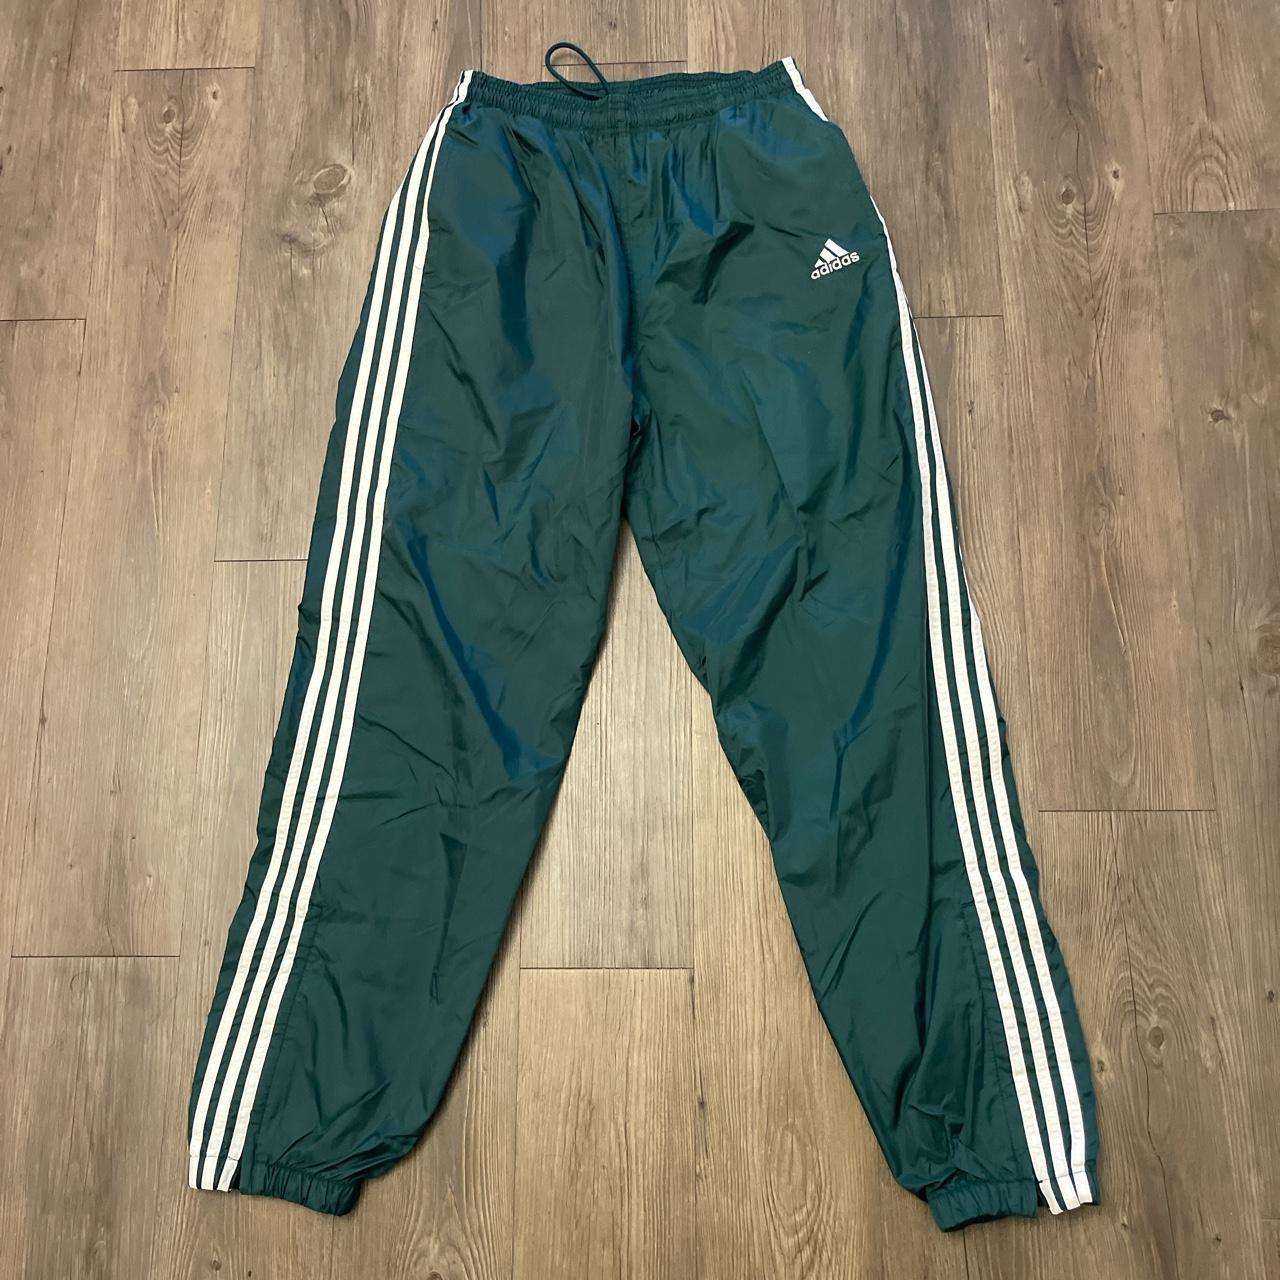 Adidas Men's Green and White Joggers-tracksuits | Depop